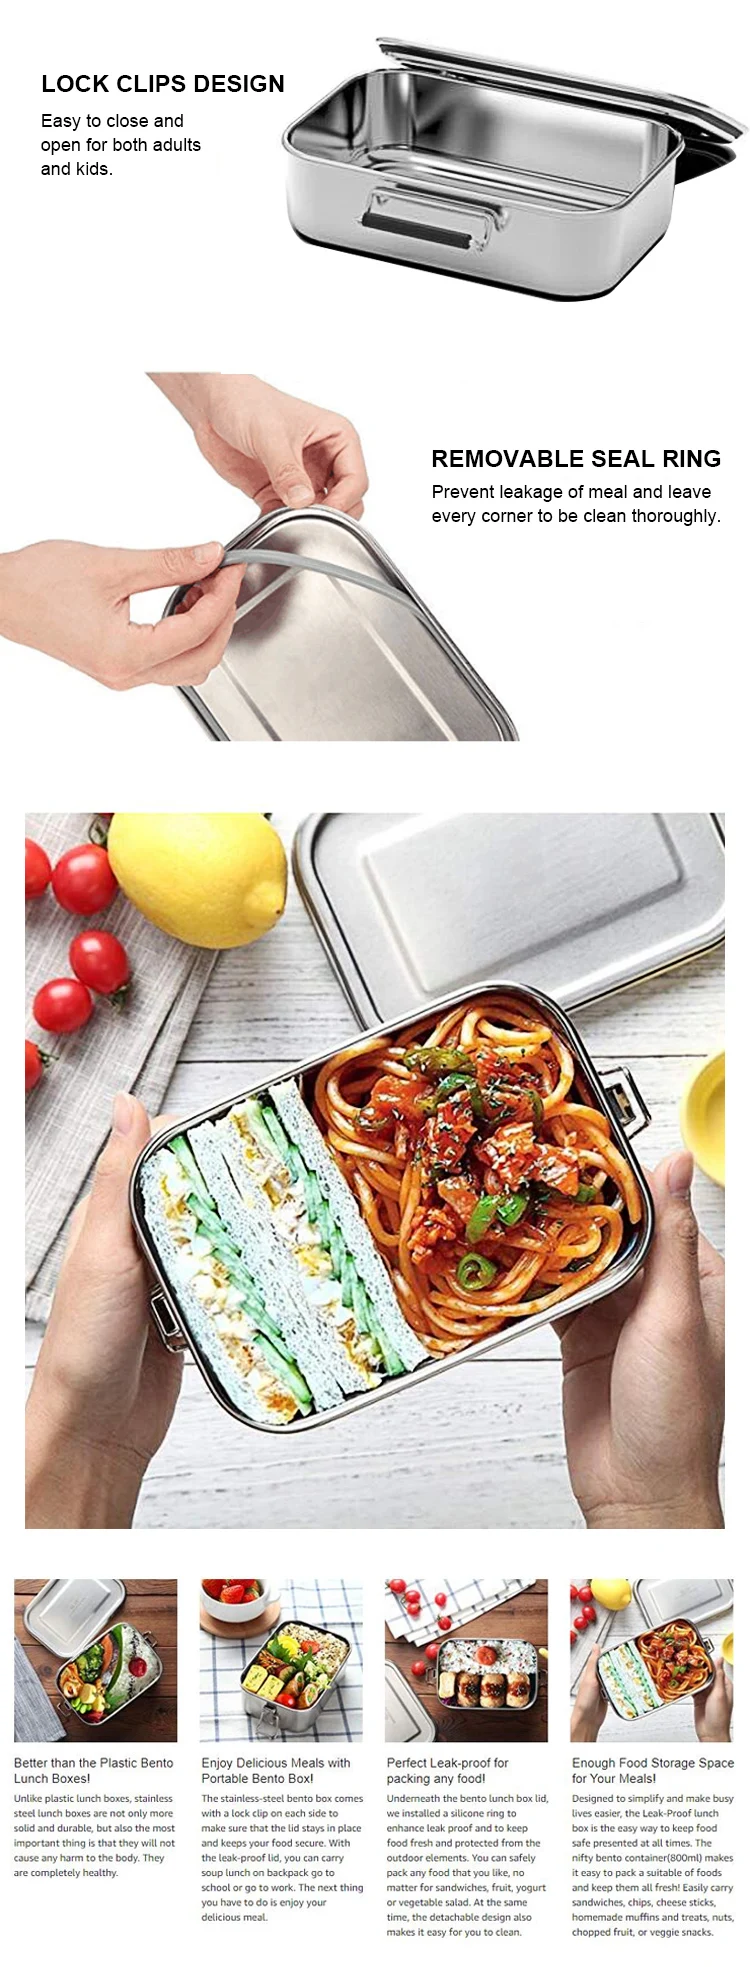 Stainless Steel Bento Lunch Box - 2 Layer 1800ML Leak Proof Container with  Safety Latch, Easy to carry to work school for lunch. Perfect for Adults